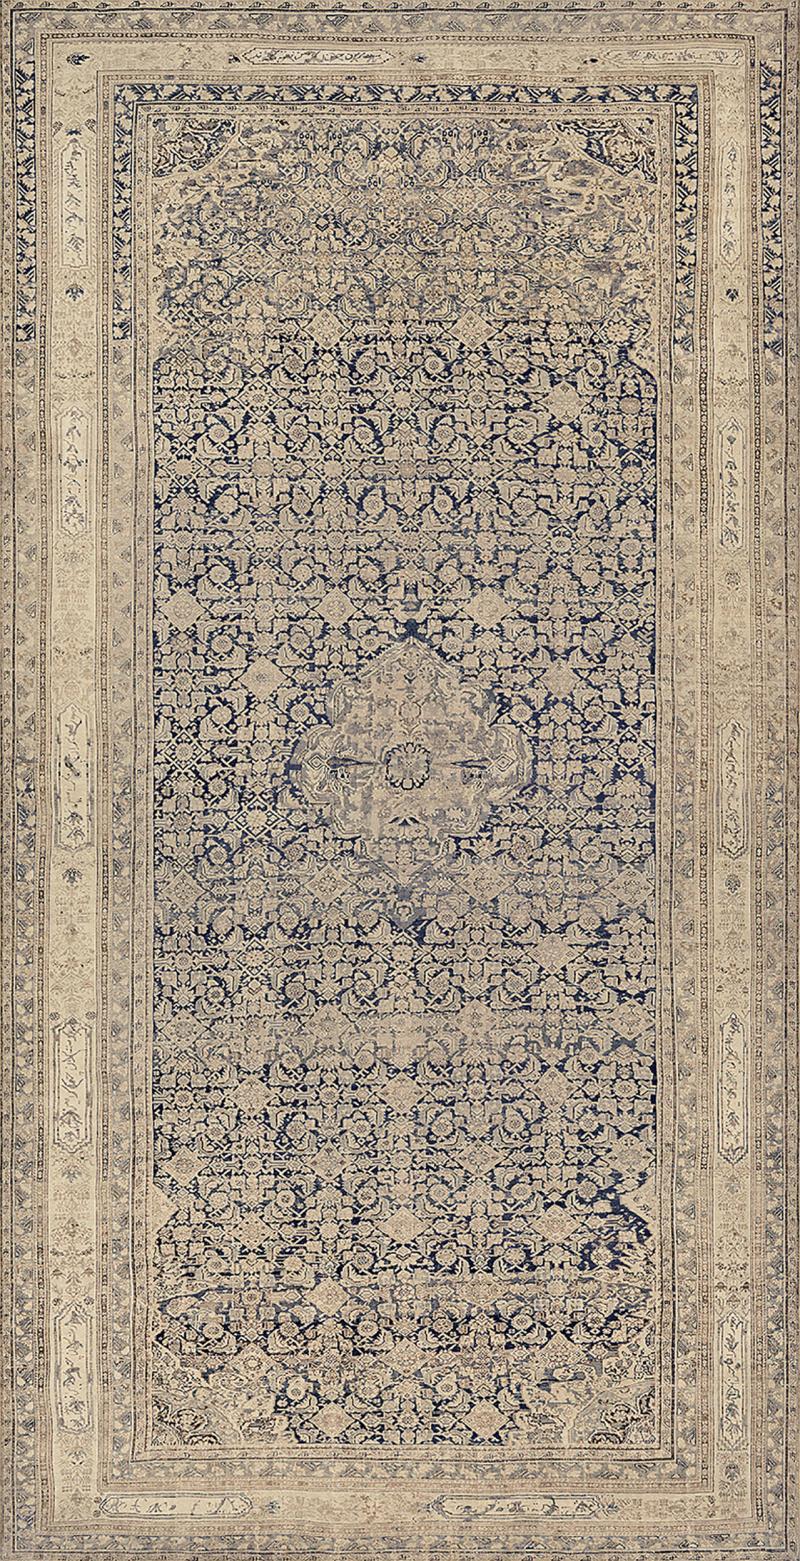 Antique Handwoven Persian Malayer Wool Rug